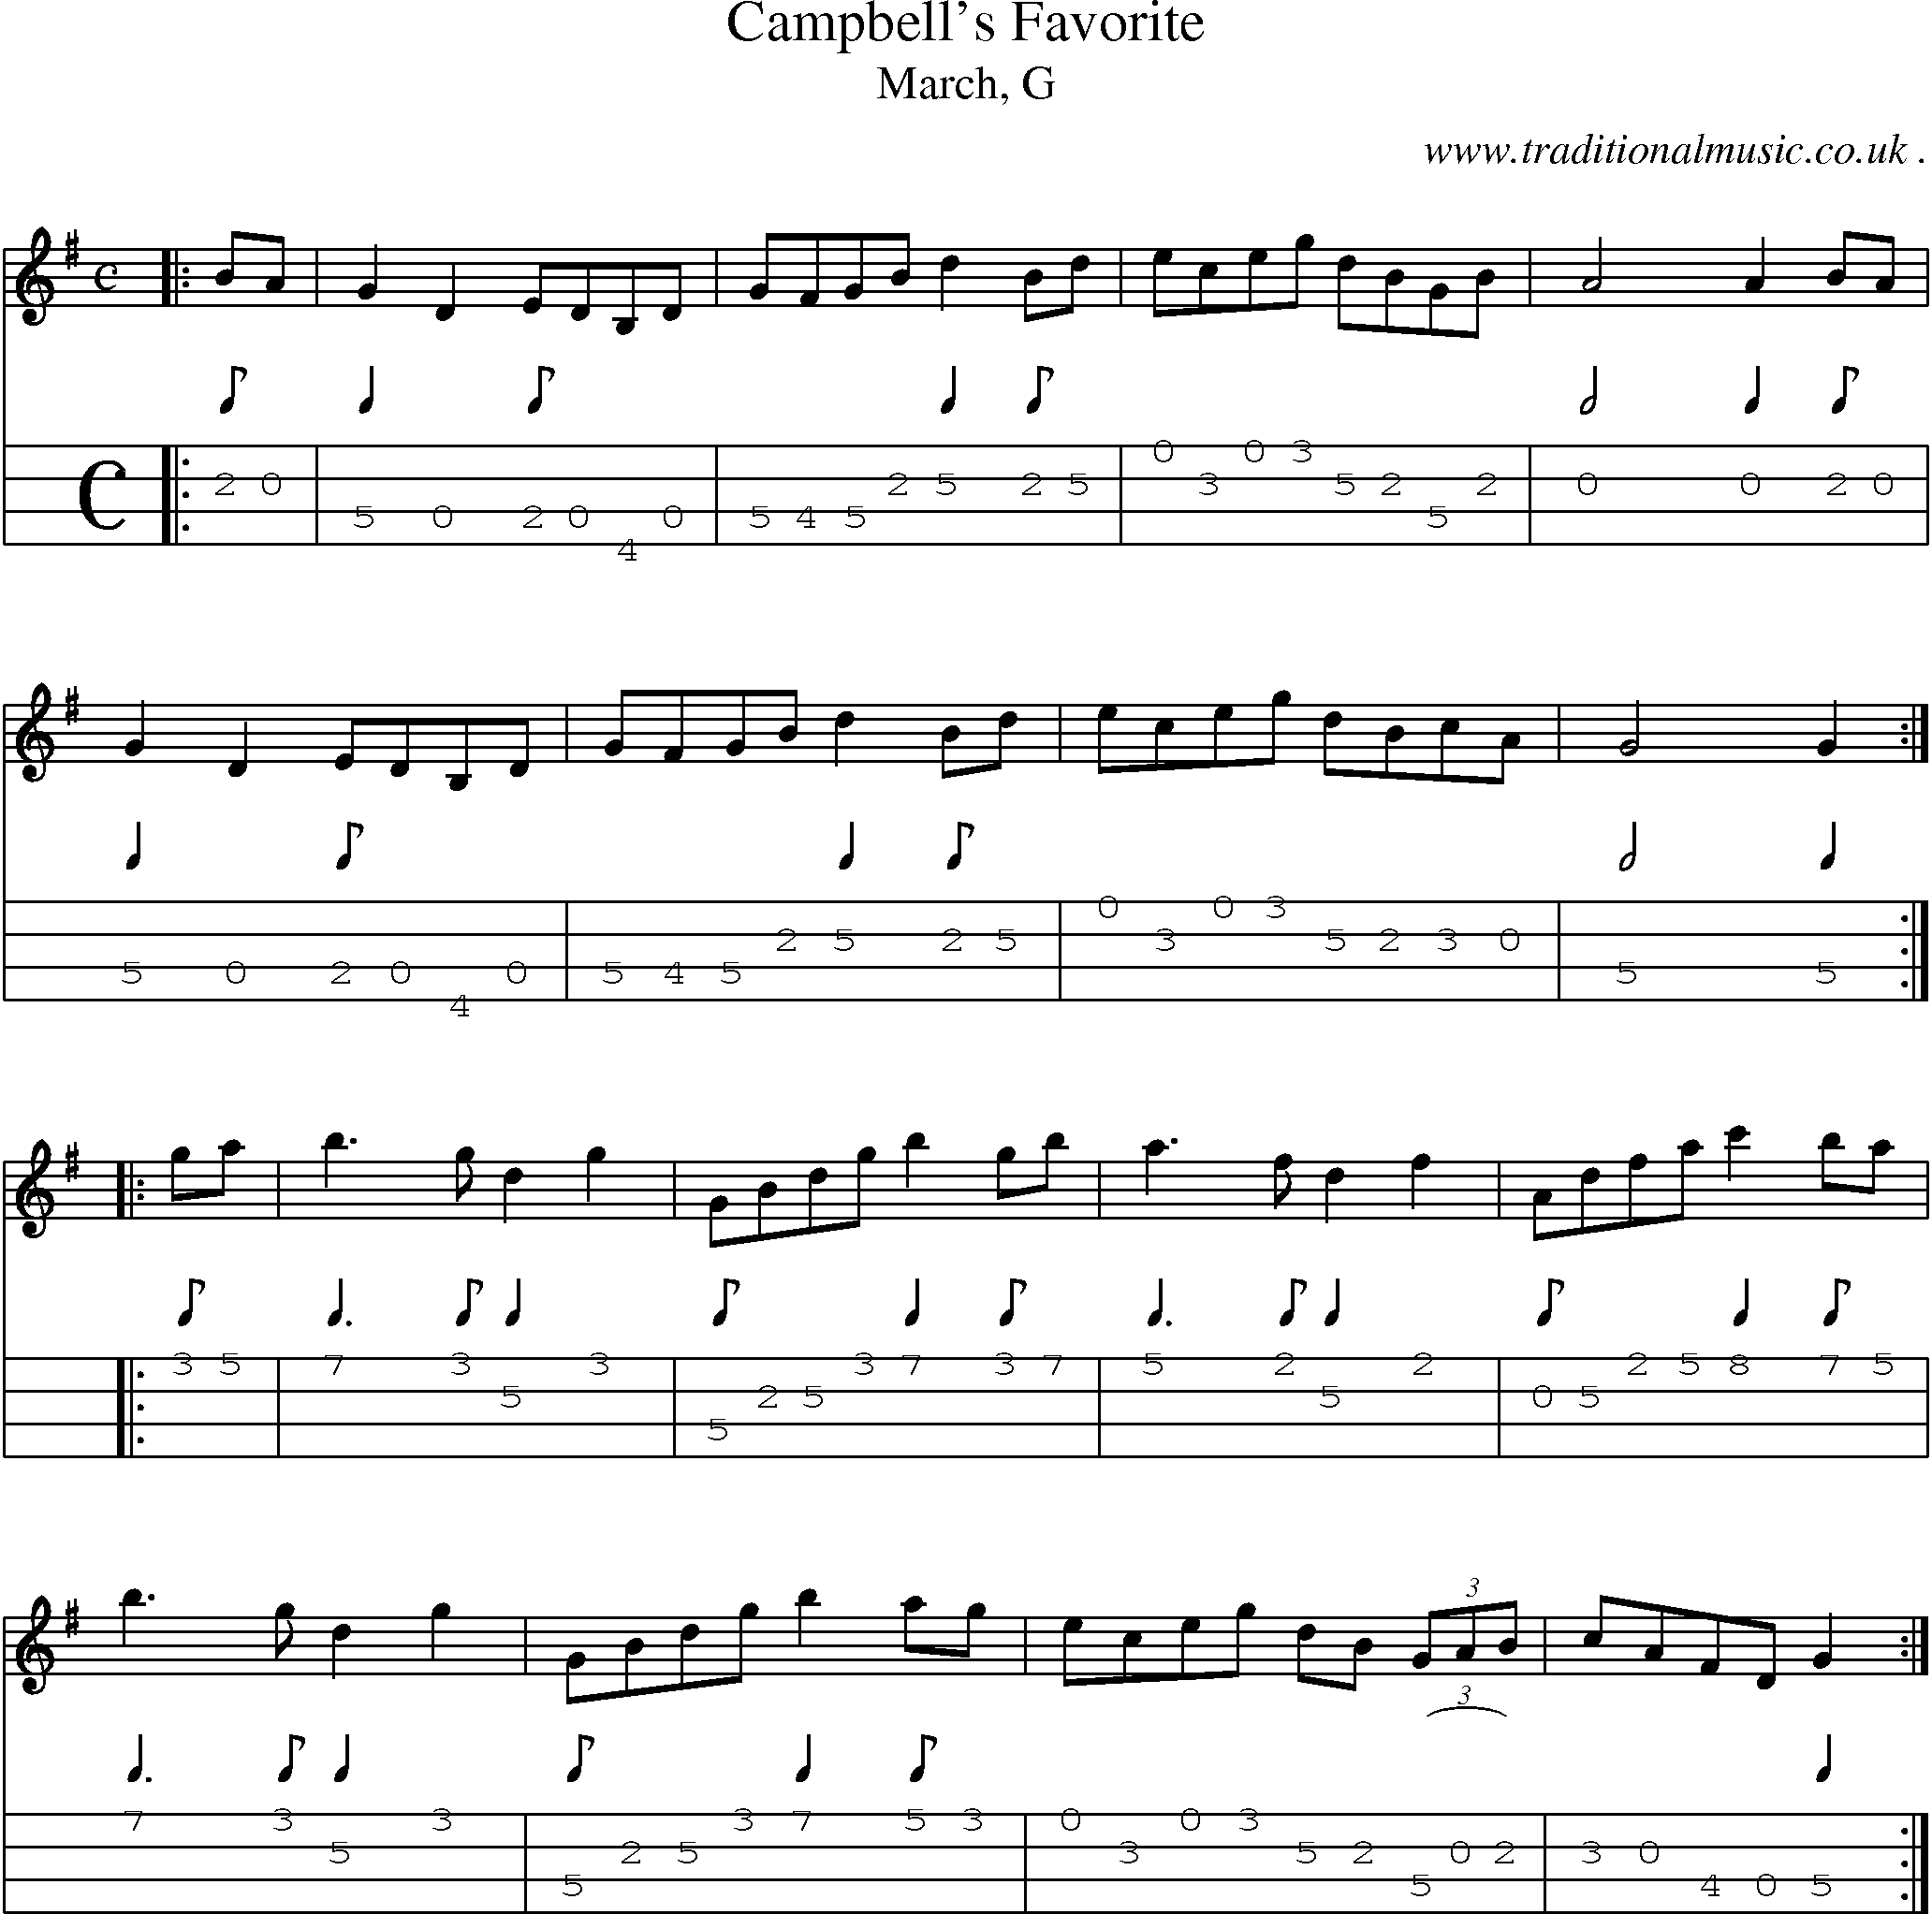 Sheet-music  score, Chords and Mandolin Tabs for Campbells Favorite